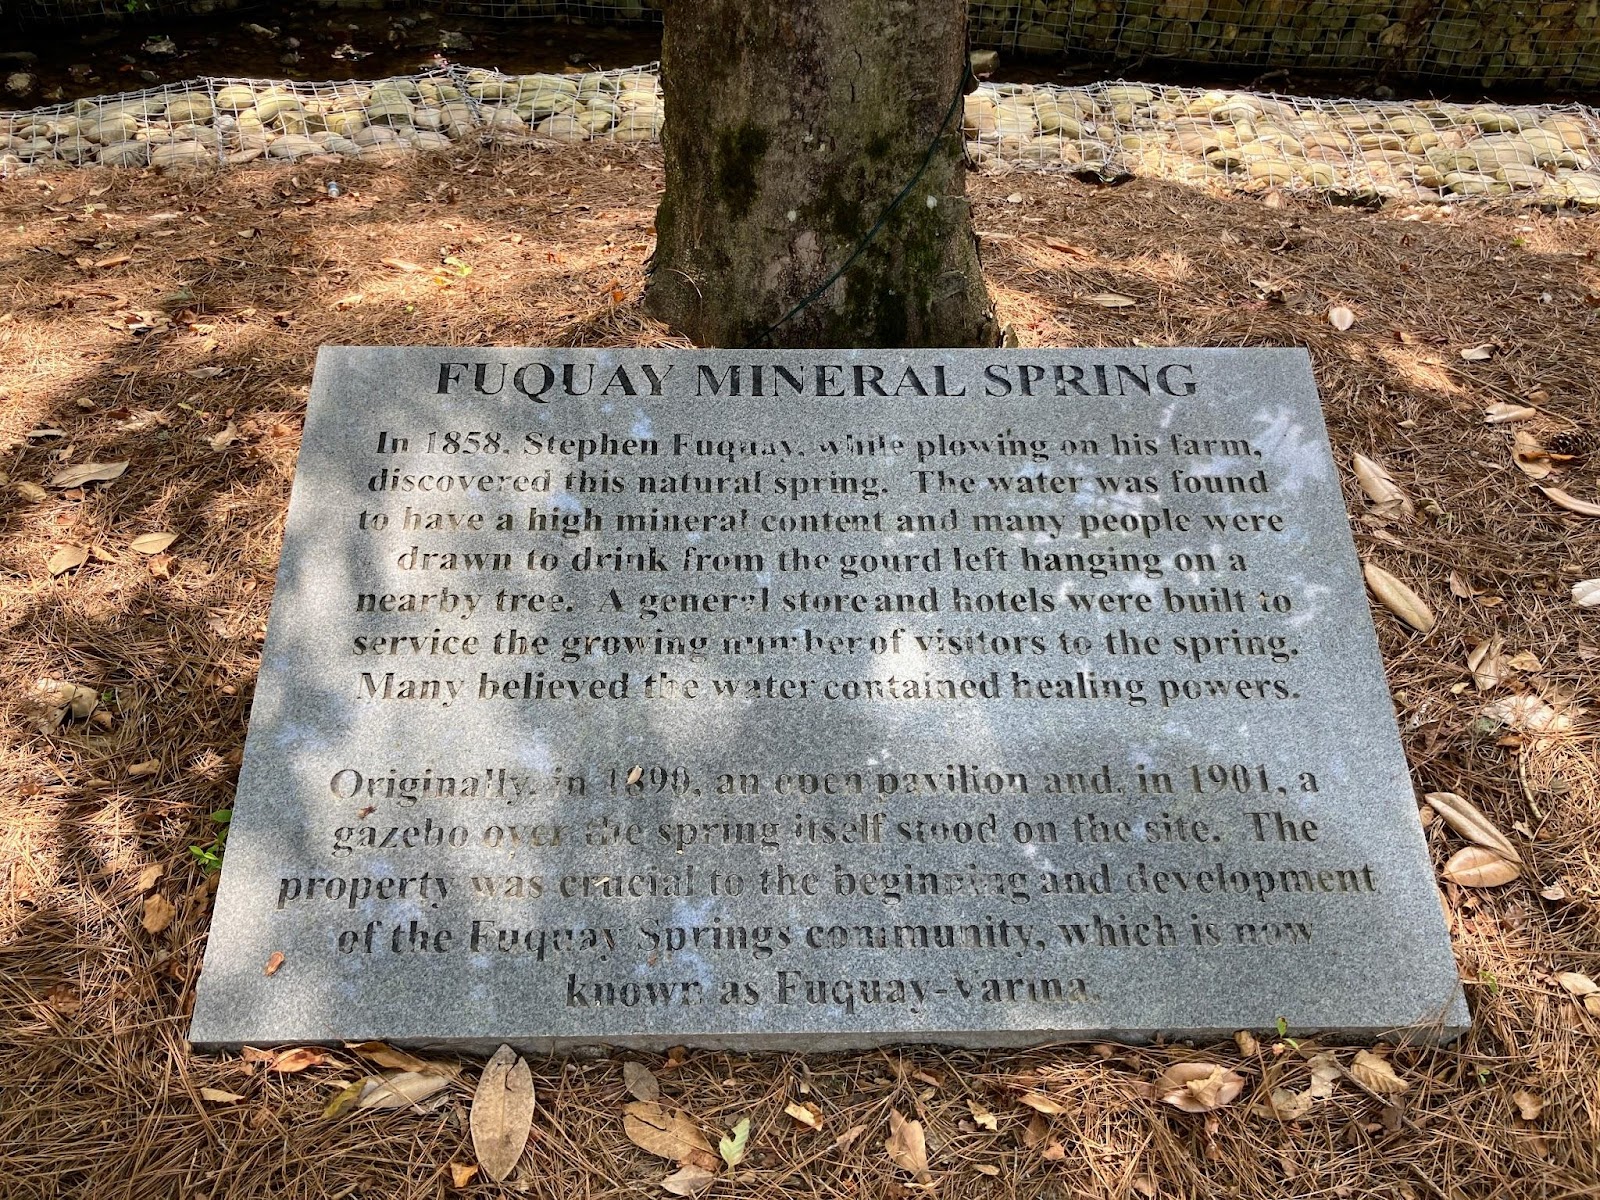 The Fuquay Mineral Springs Parks is a convenient resting place for those living in Fuquay-Varina.